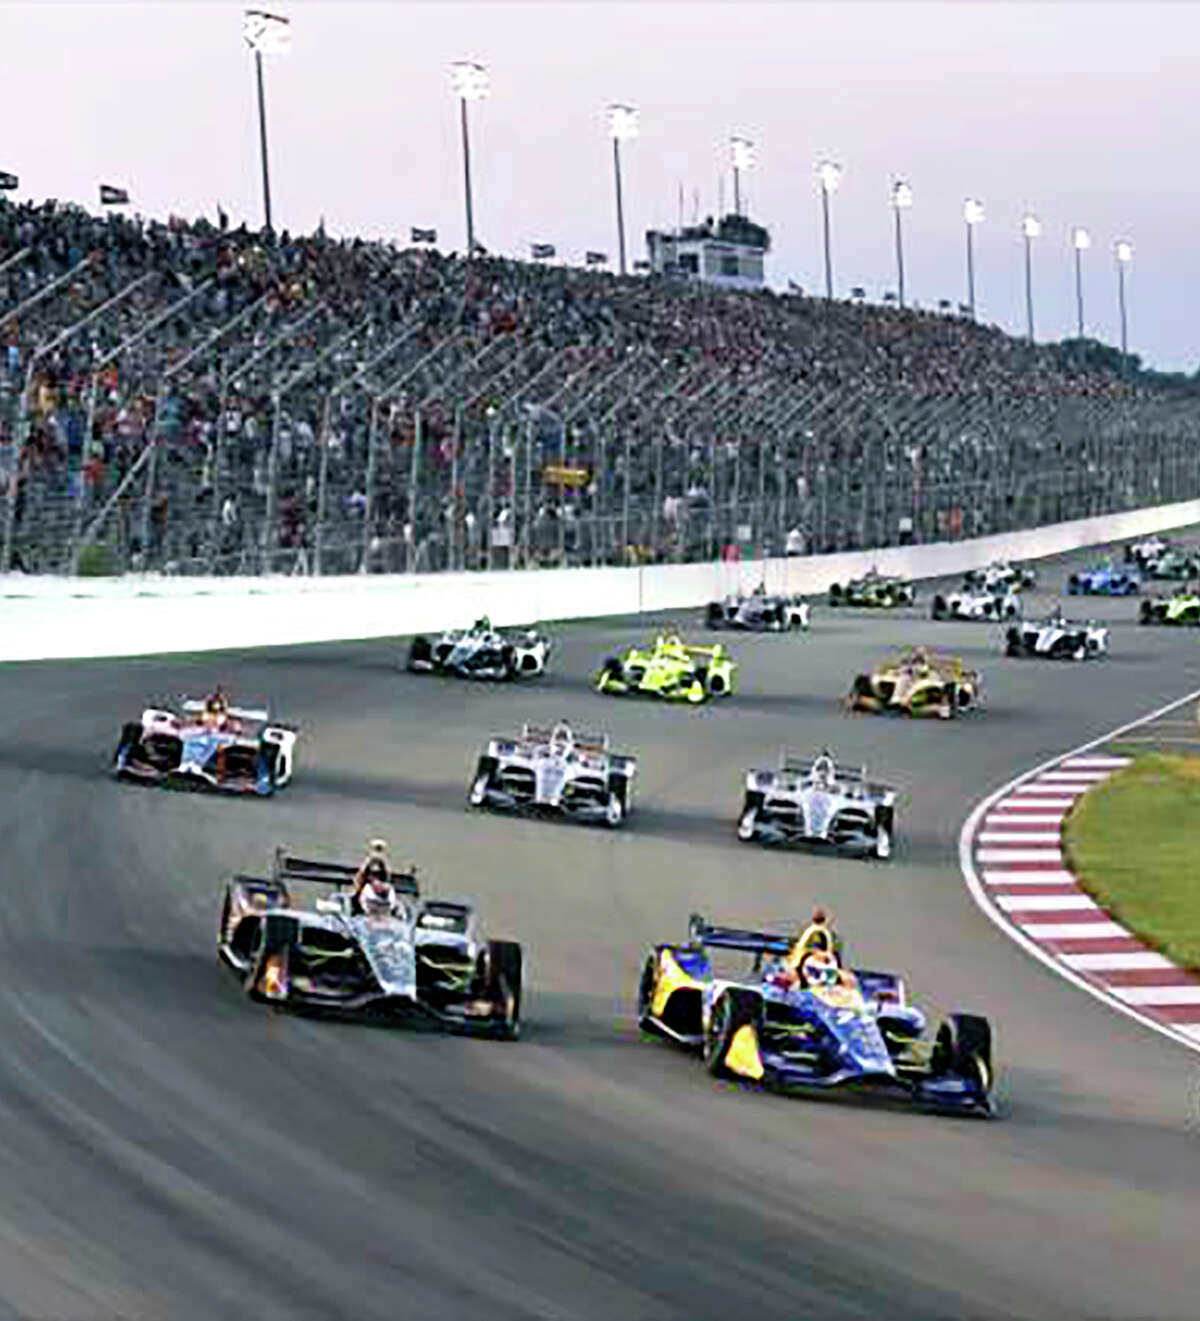 The 2023 Bommarito 500 IndyCar race at World Wide Technology Raceway in Madison is set for Sunday afternoon, Aug. 27. Above, drivers take Turn 1 in a previous race at WWTR.